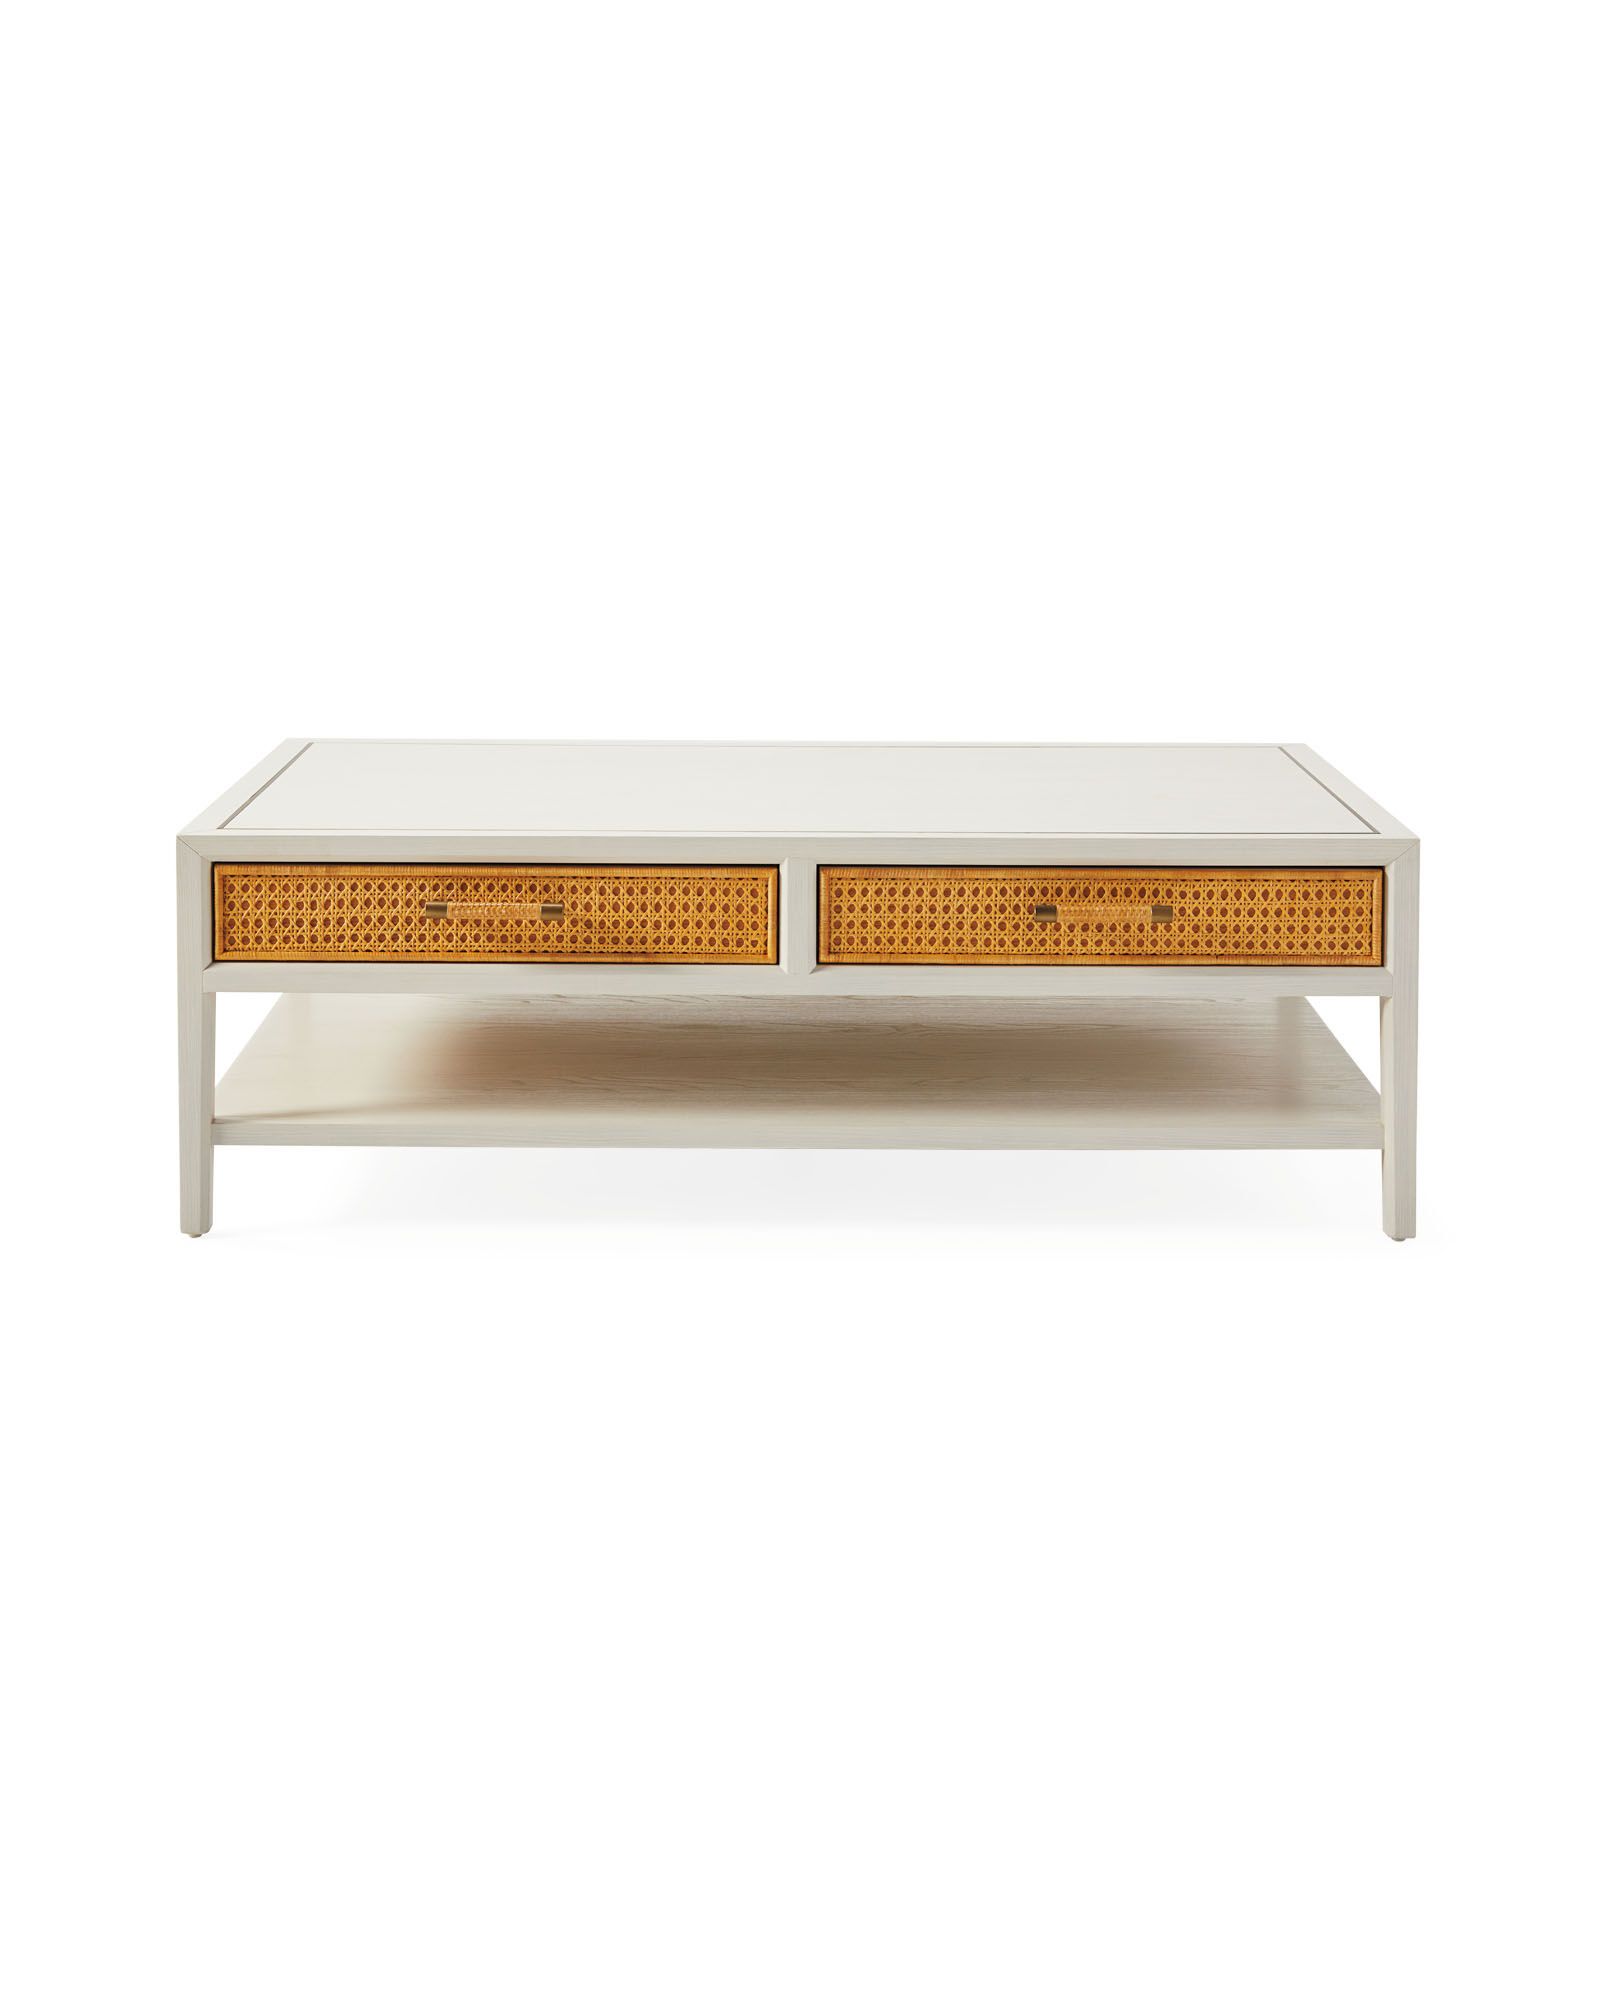 Bar Island Coffee Table | Serena and Lily